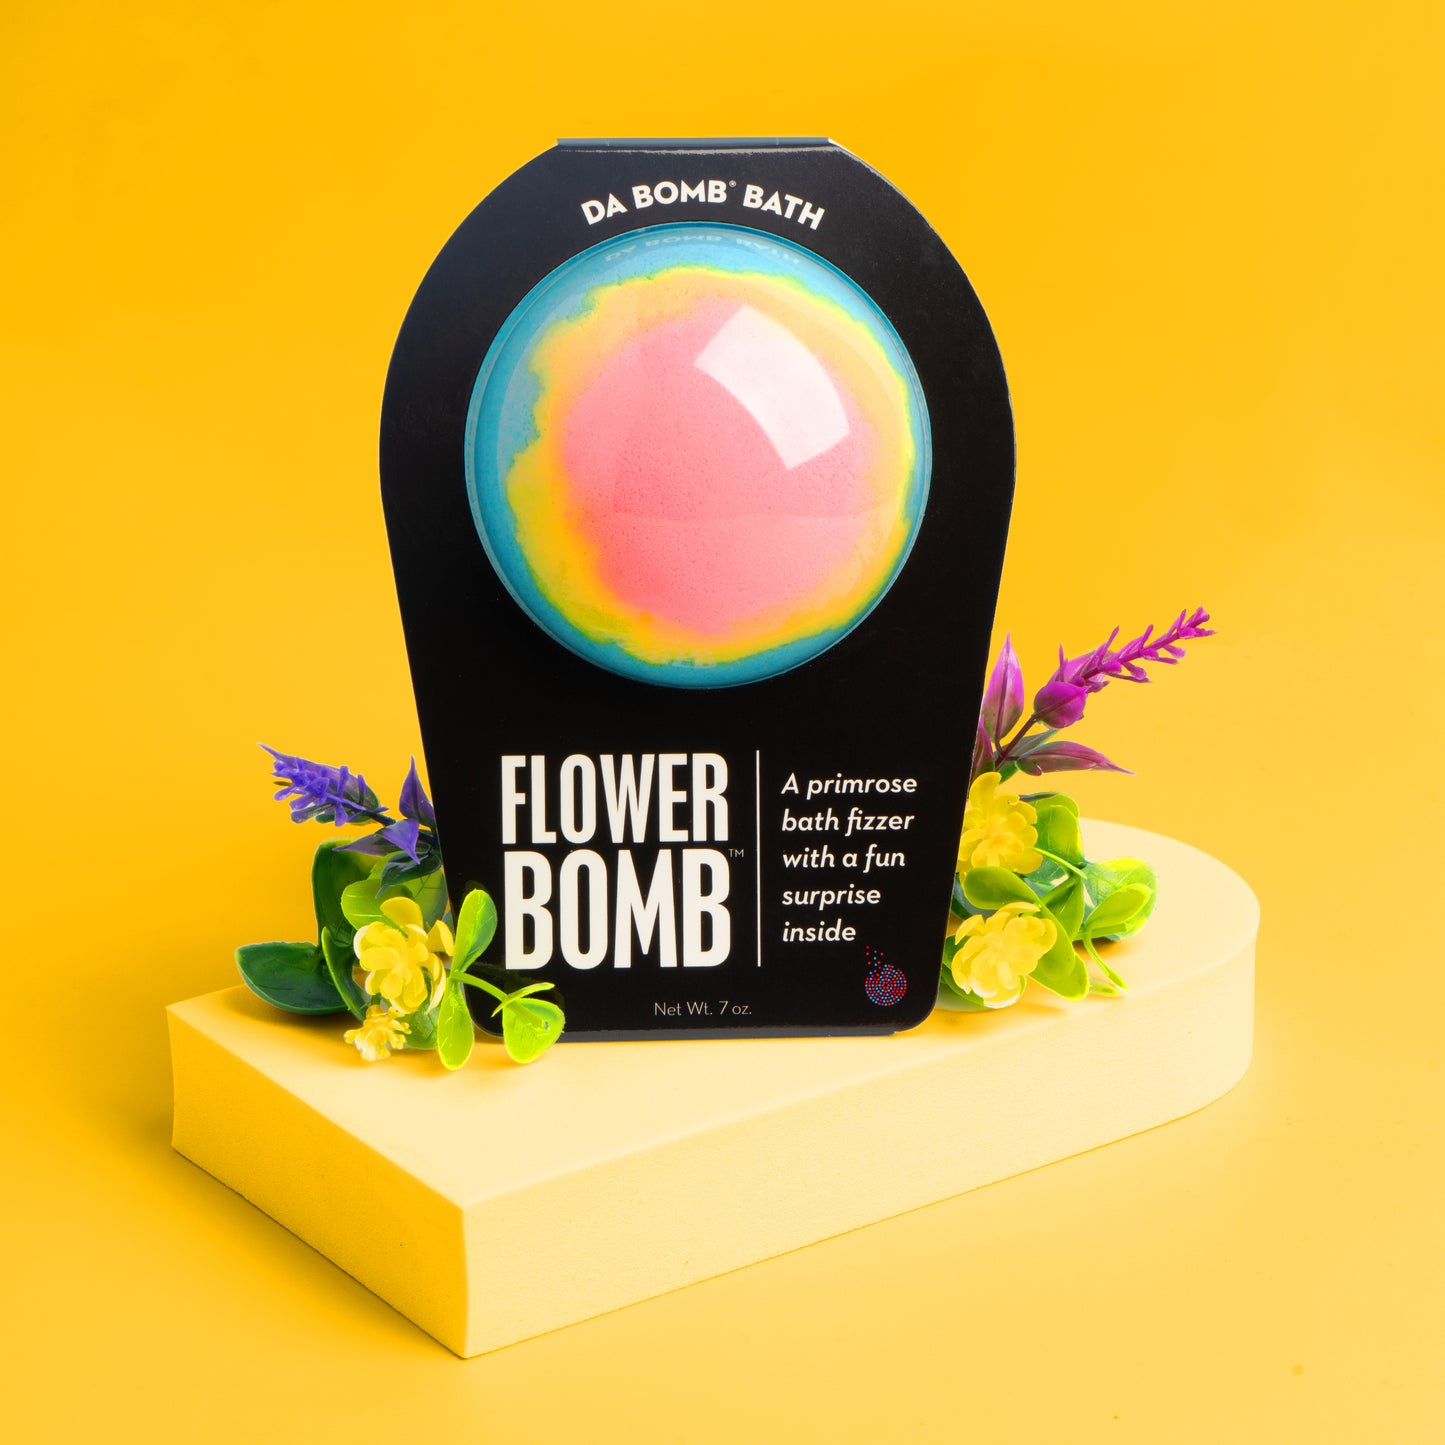 multicolored bath bomb on yellow riser with flowers on both sides